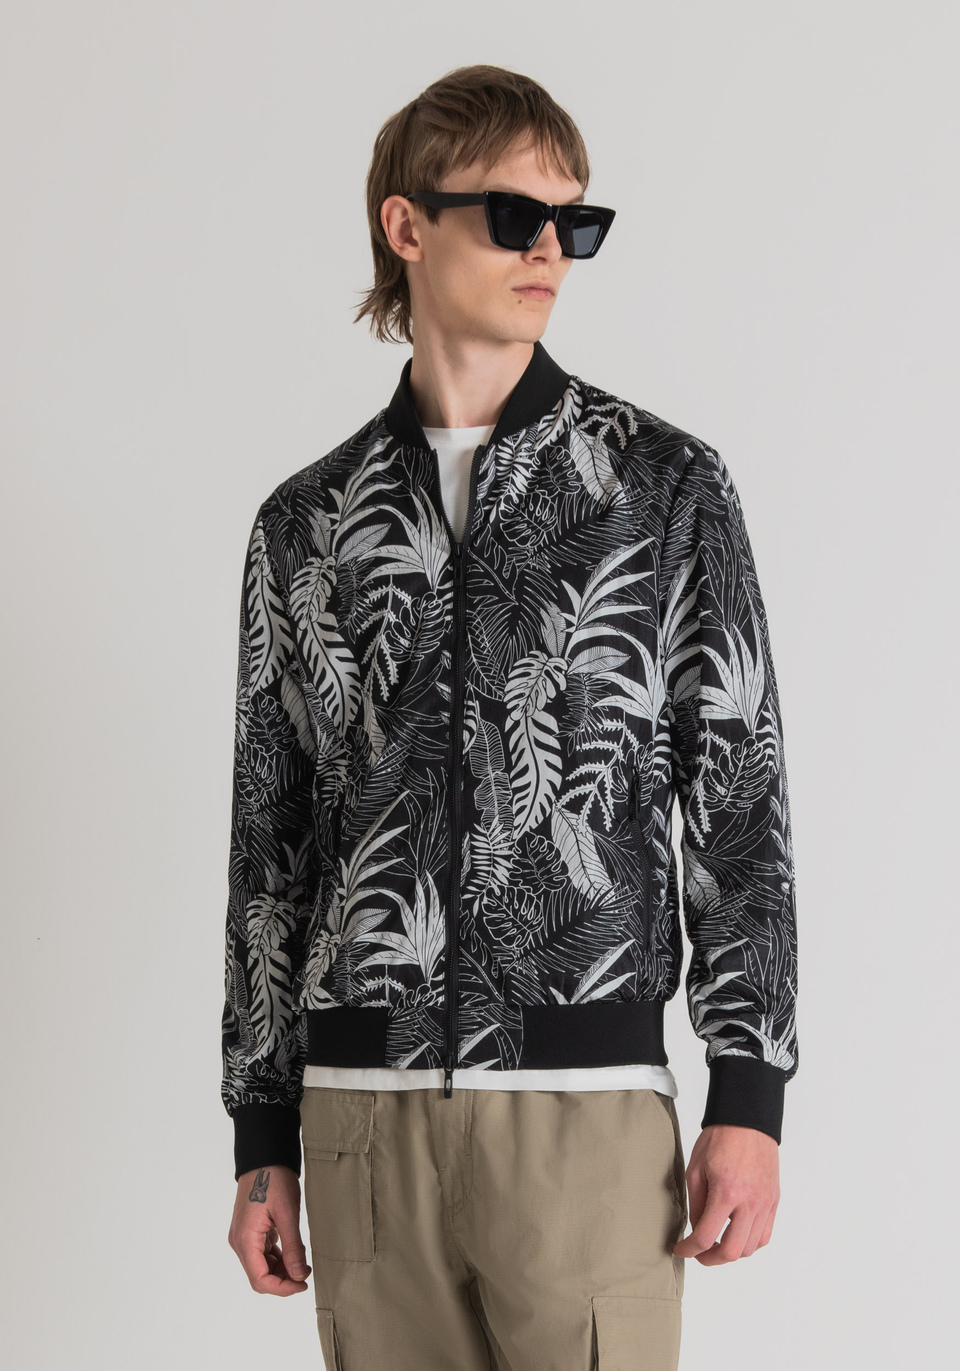 REGULAR FIT BOMBER JACKET IN TECHNICAL FABRIC WITH ALL-OVER JUNGLE MOTIF - Antony Morato Online Shop